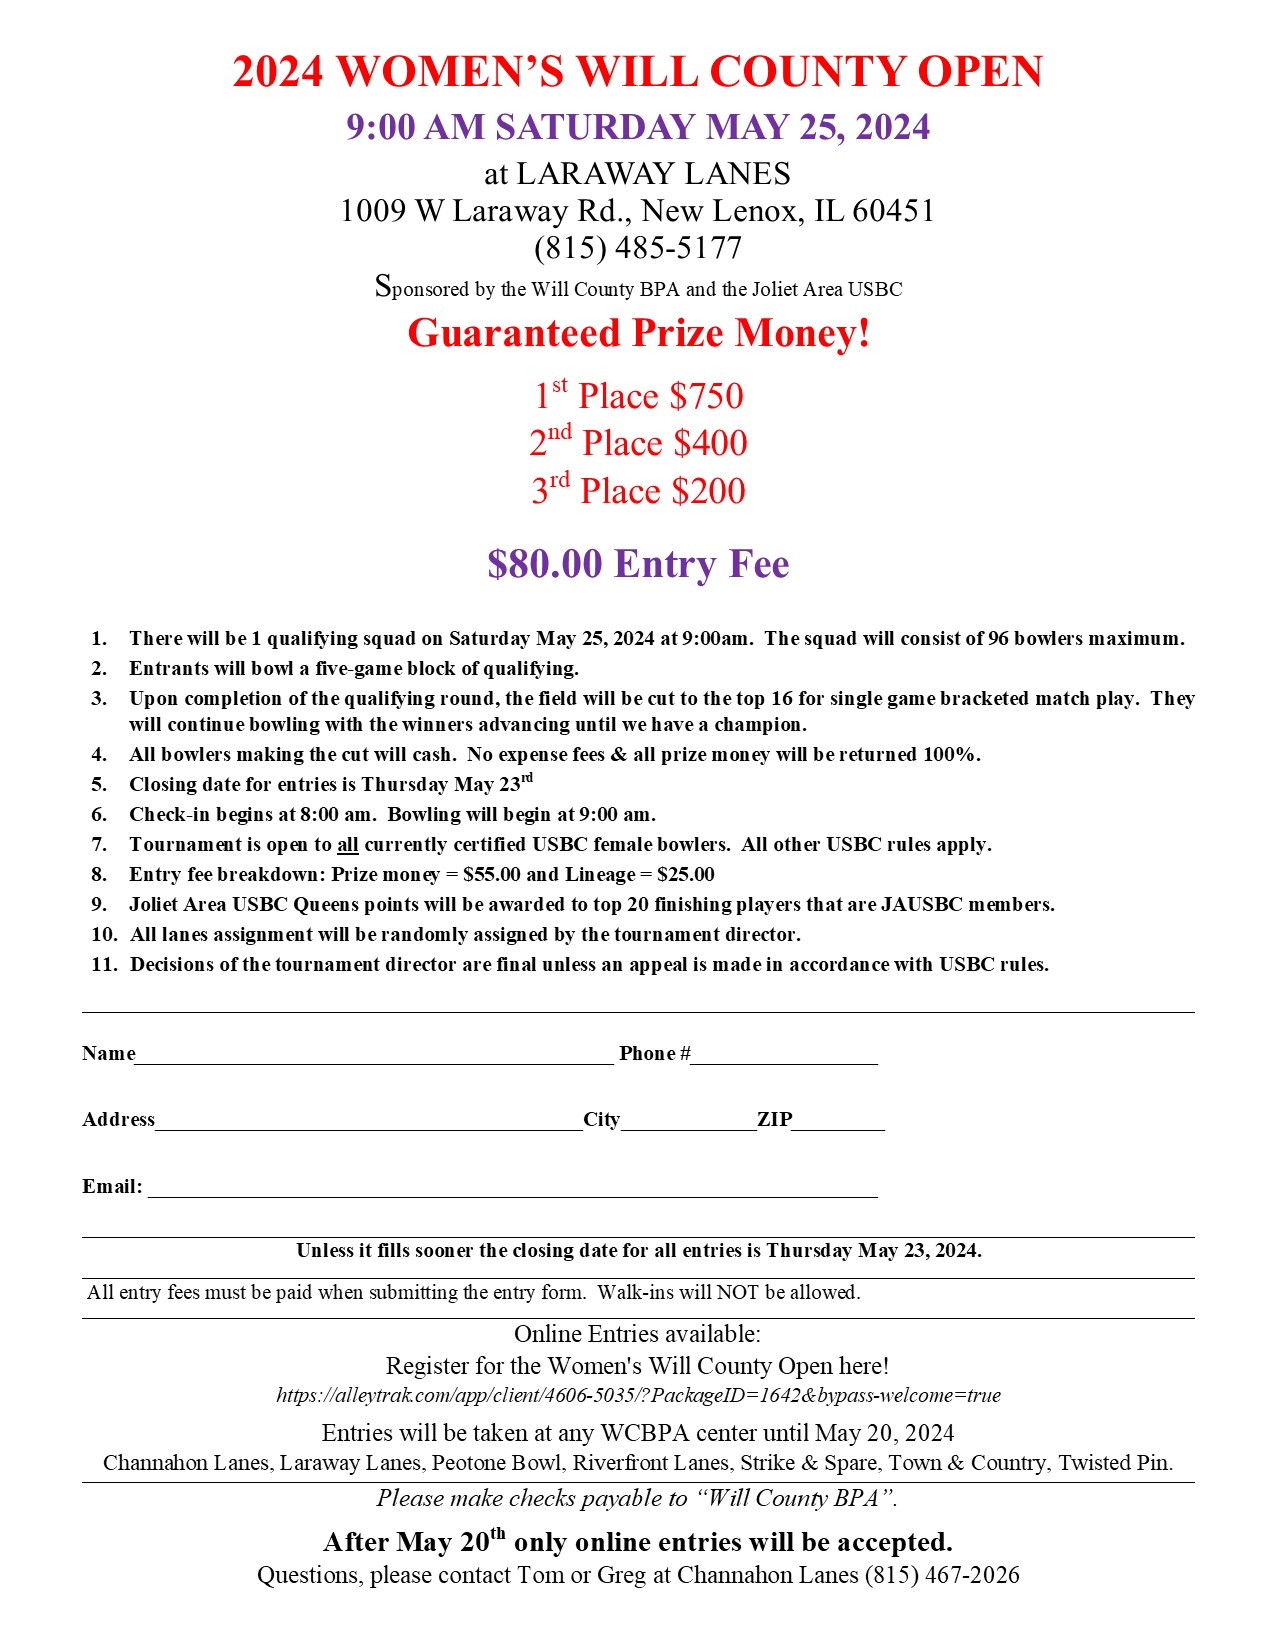 Click Here for more info about the Women's Will County Open